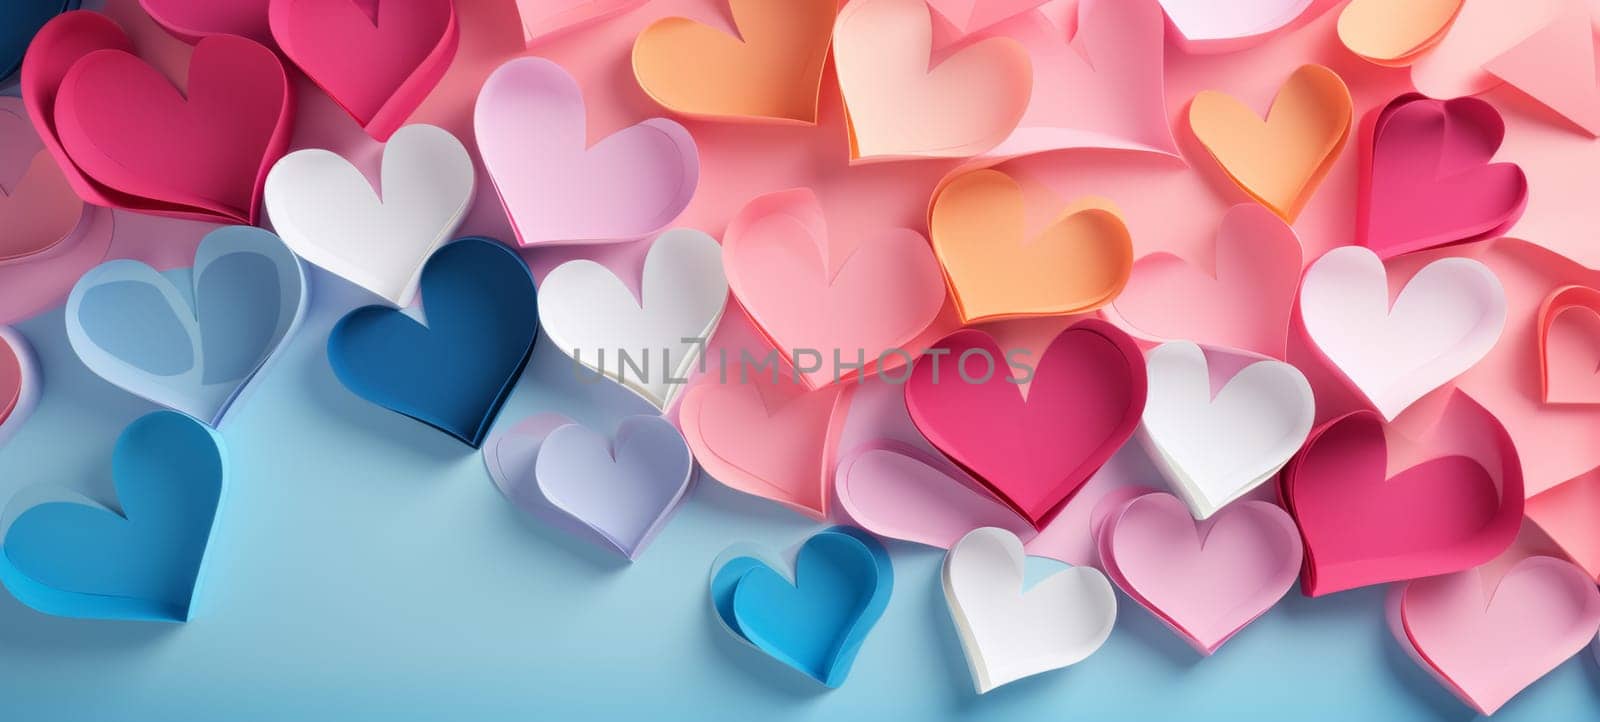 Colorful Paper Hearts Array by andreyz